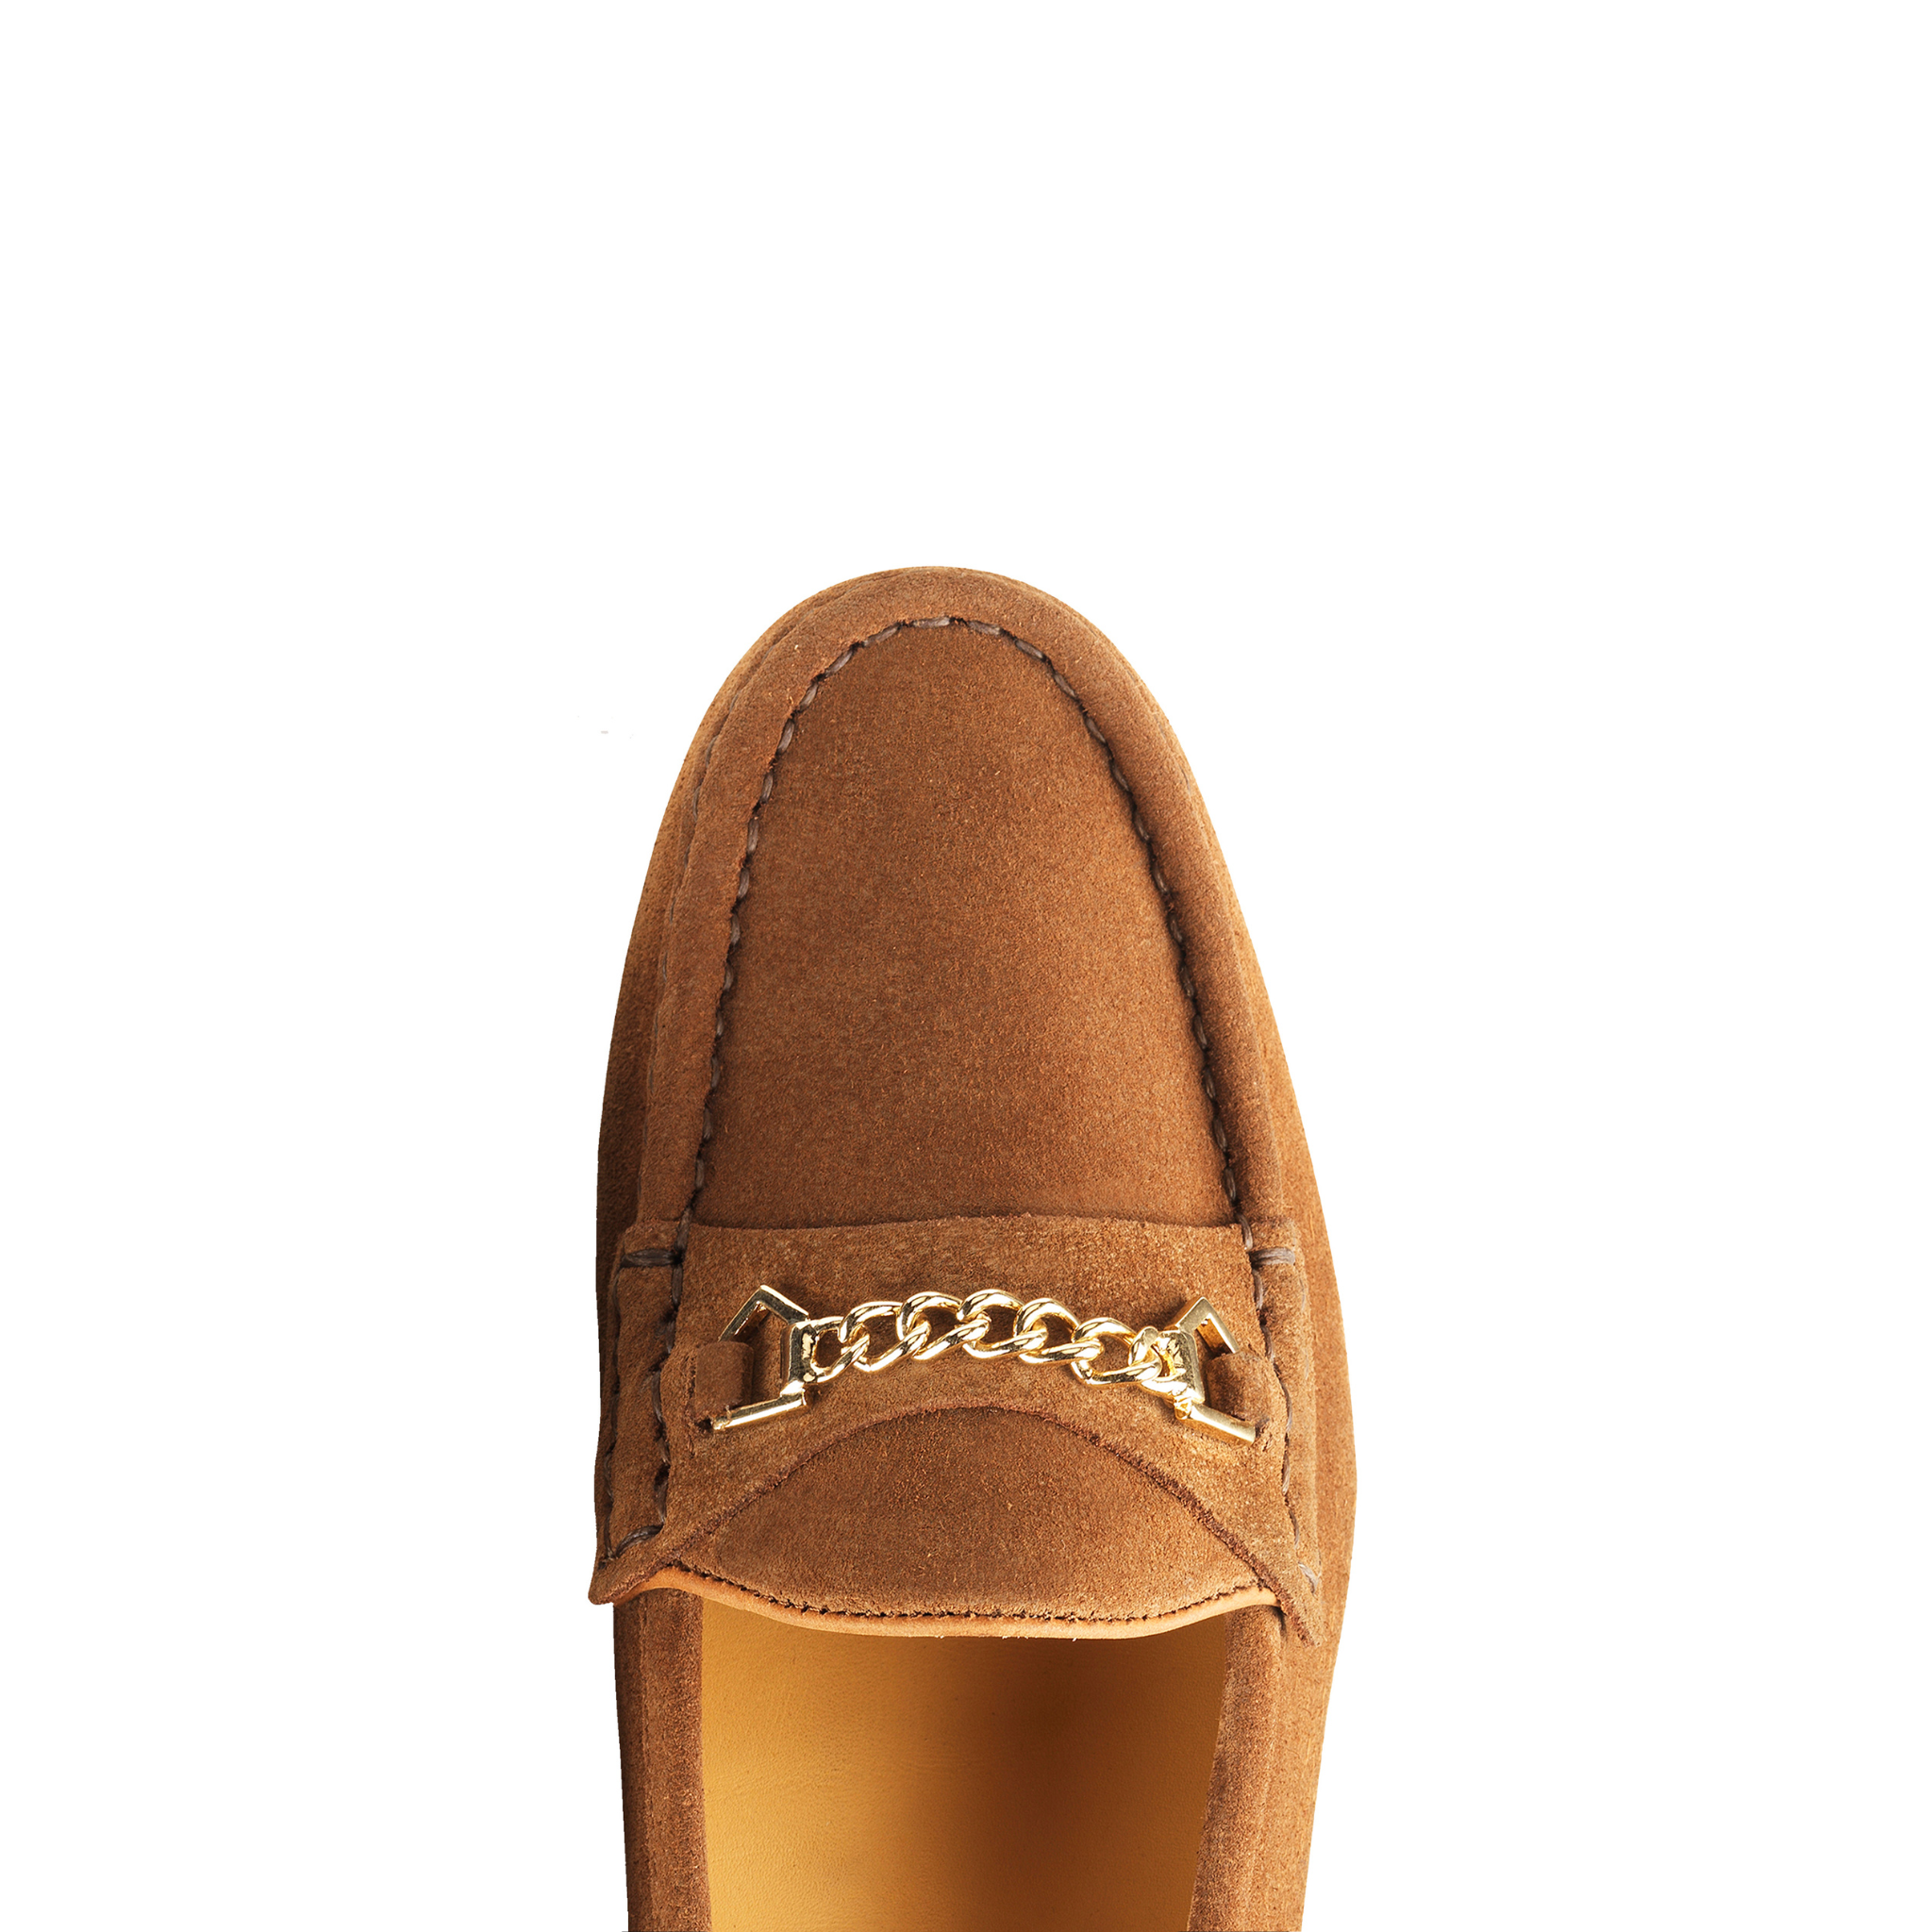 Apsley Loafer Tan Suede